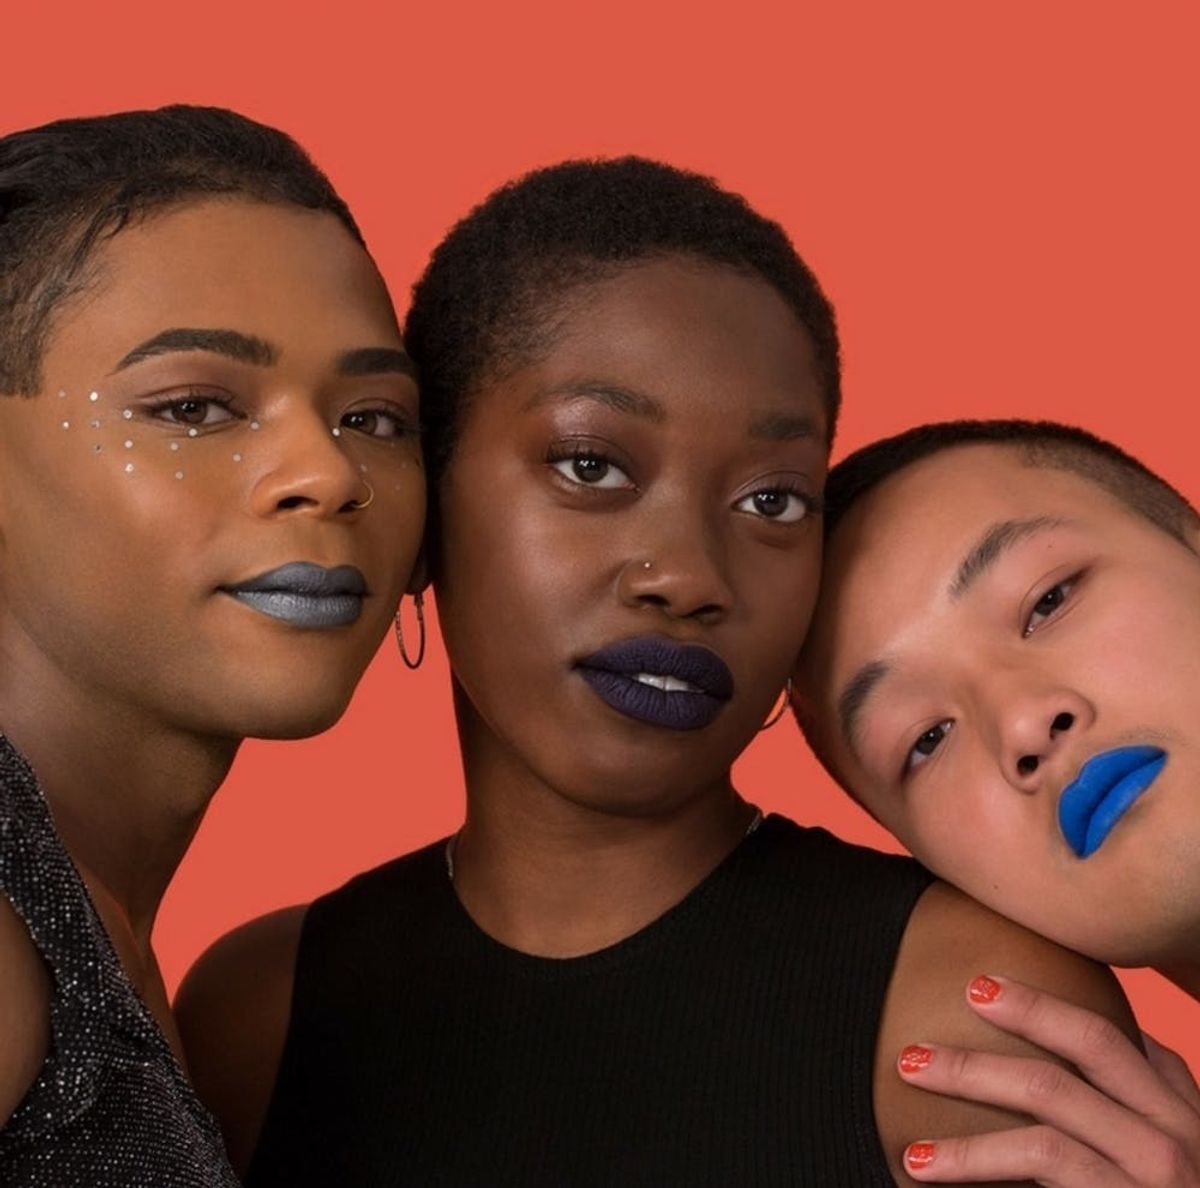 How This Gender-Neutral Beauty Brand Is Transforming the Makeup Game